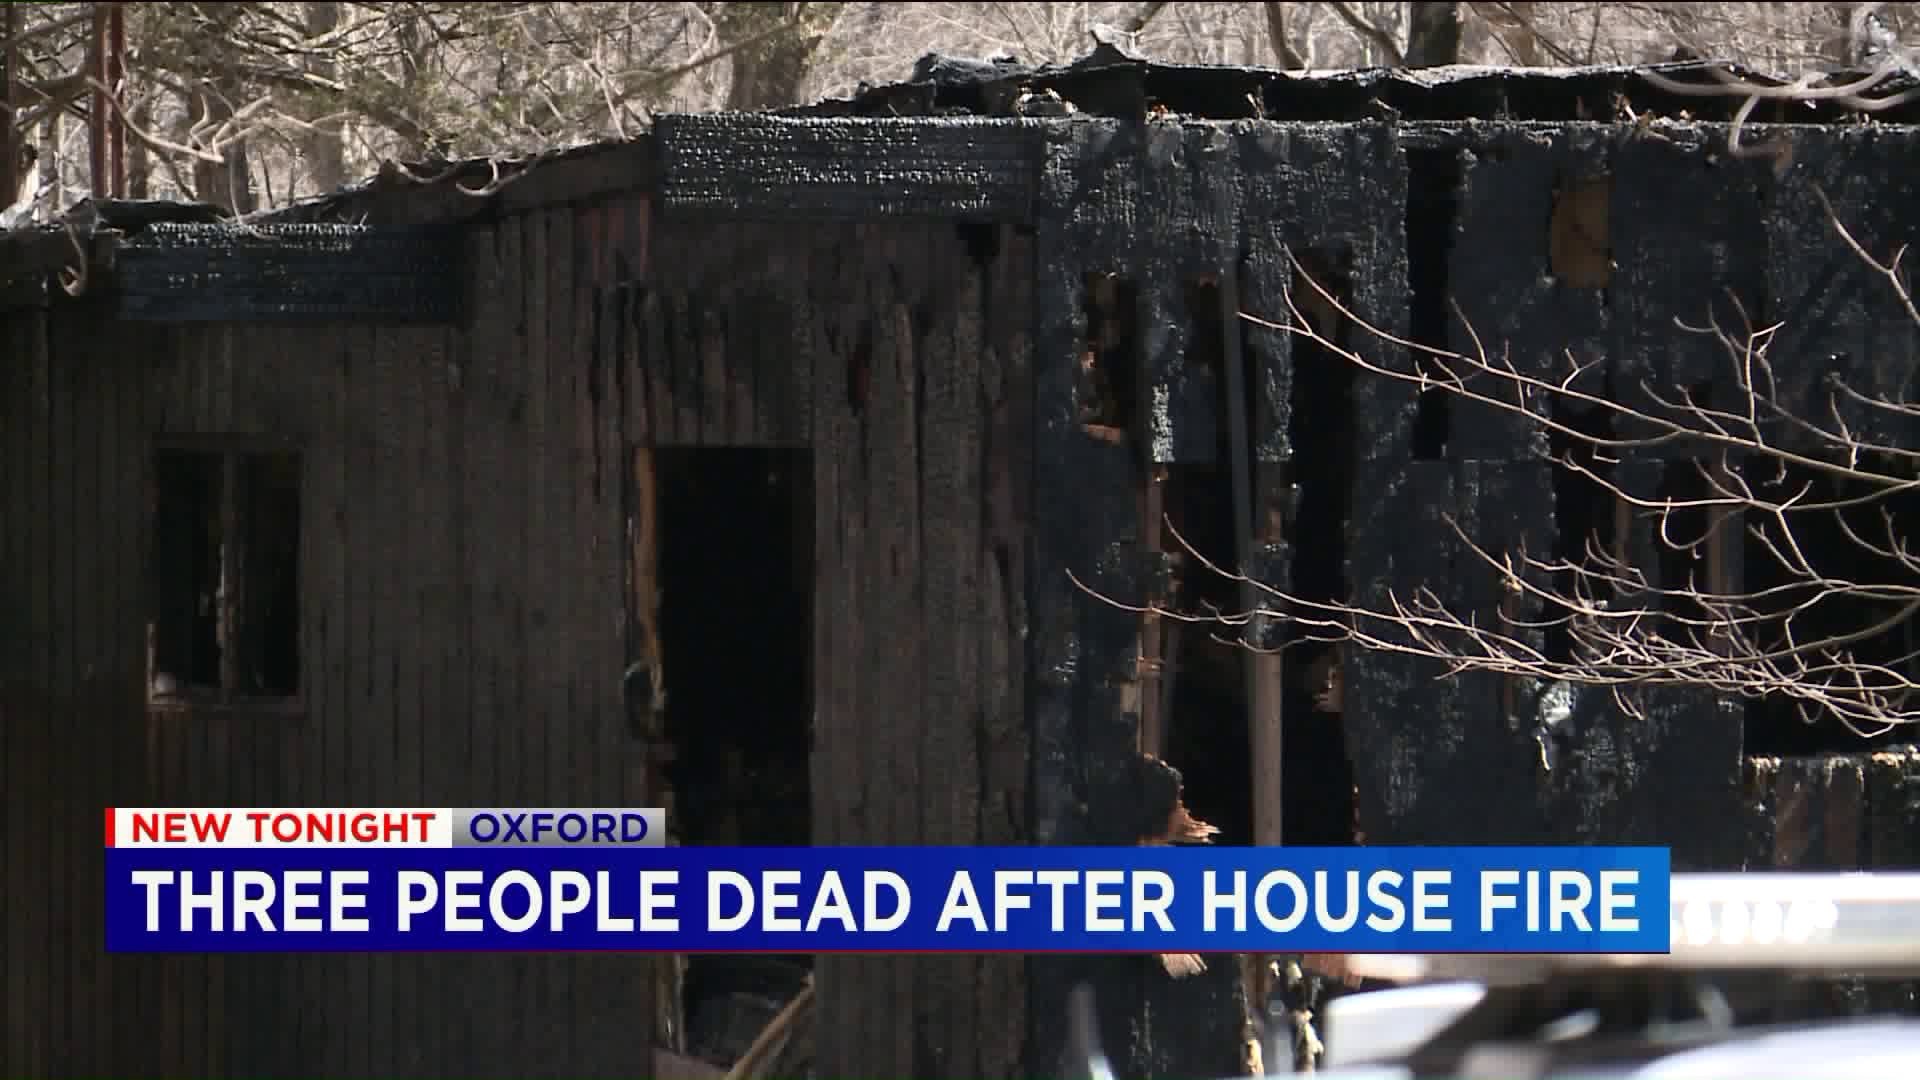 Firefighters find 3 dead in Oxford house fire